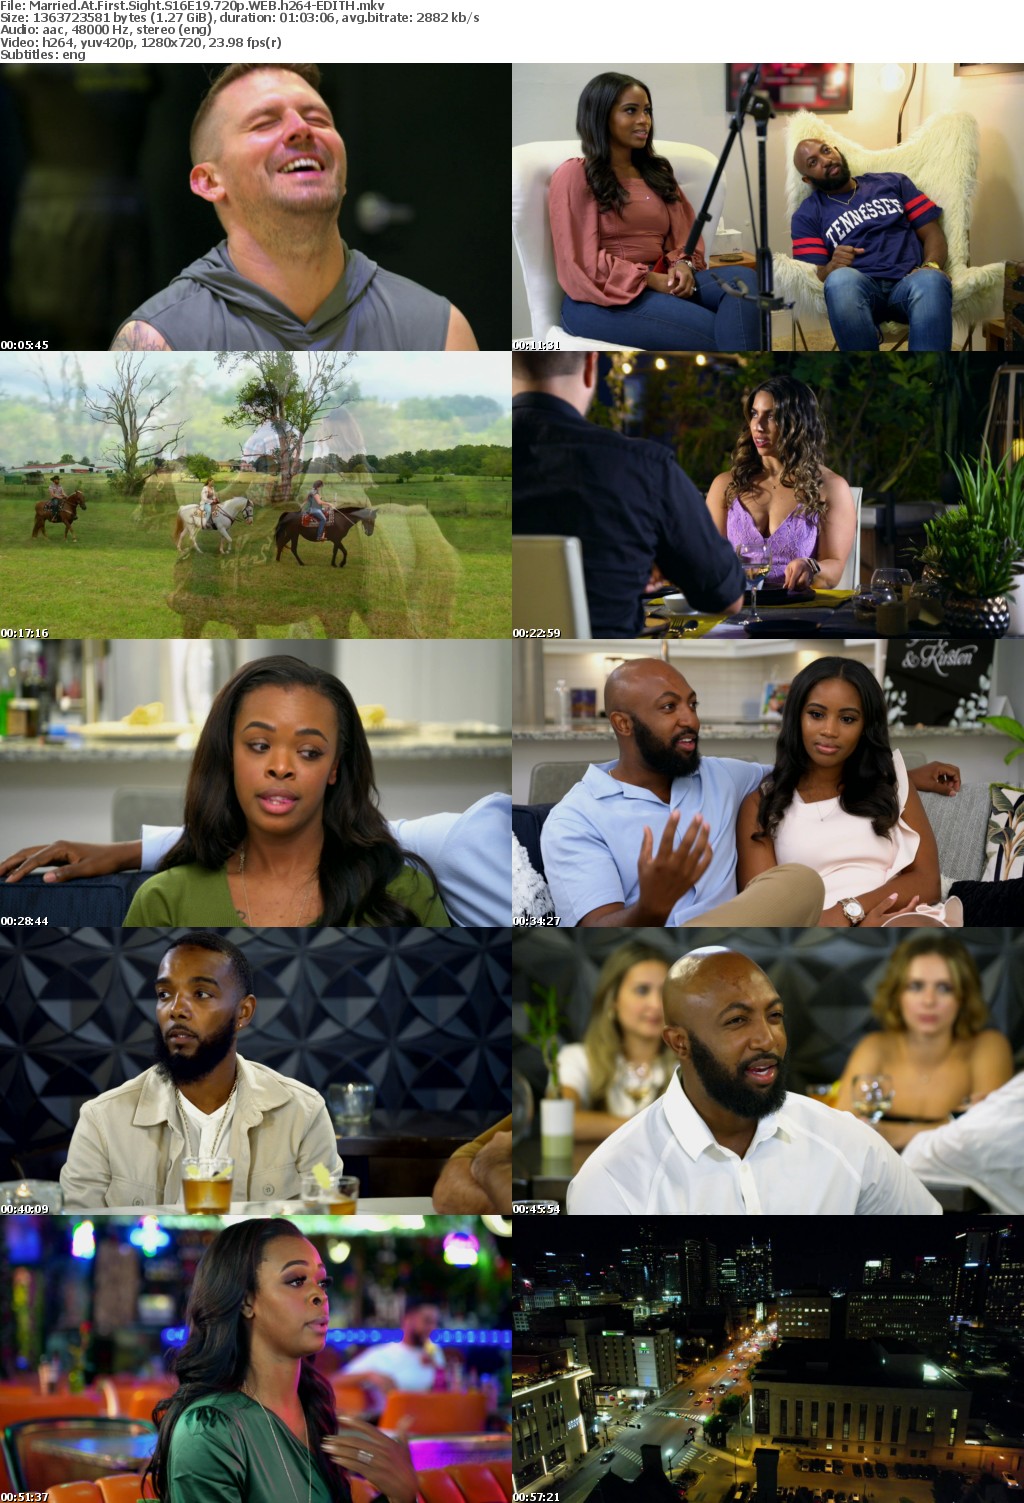 Married At First Sight S16E19 720p WEB h264-EDITH